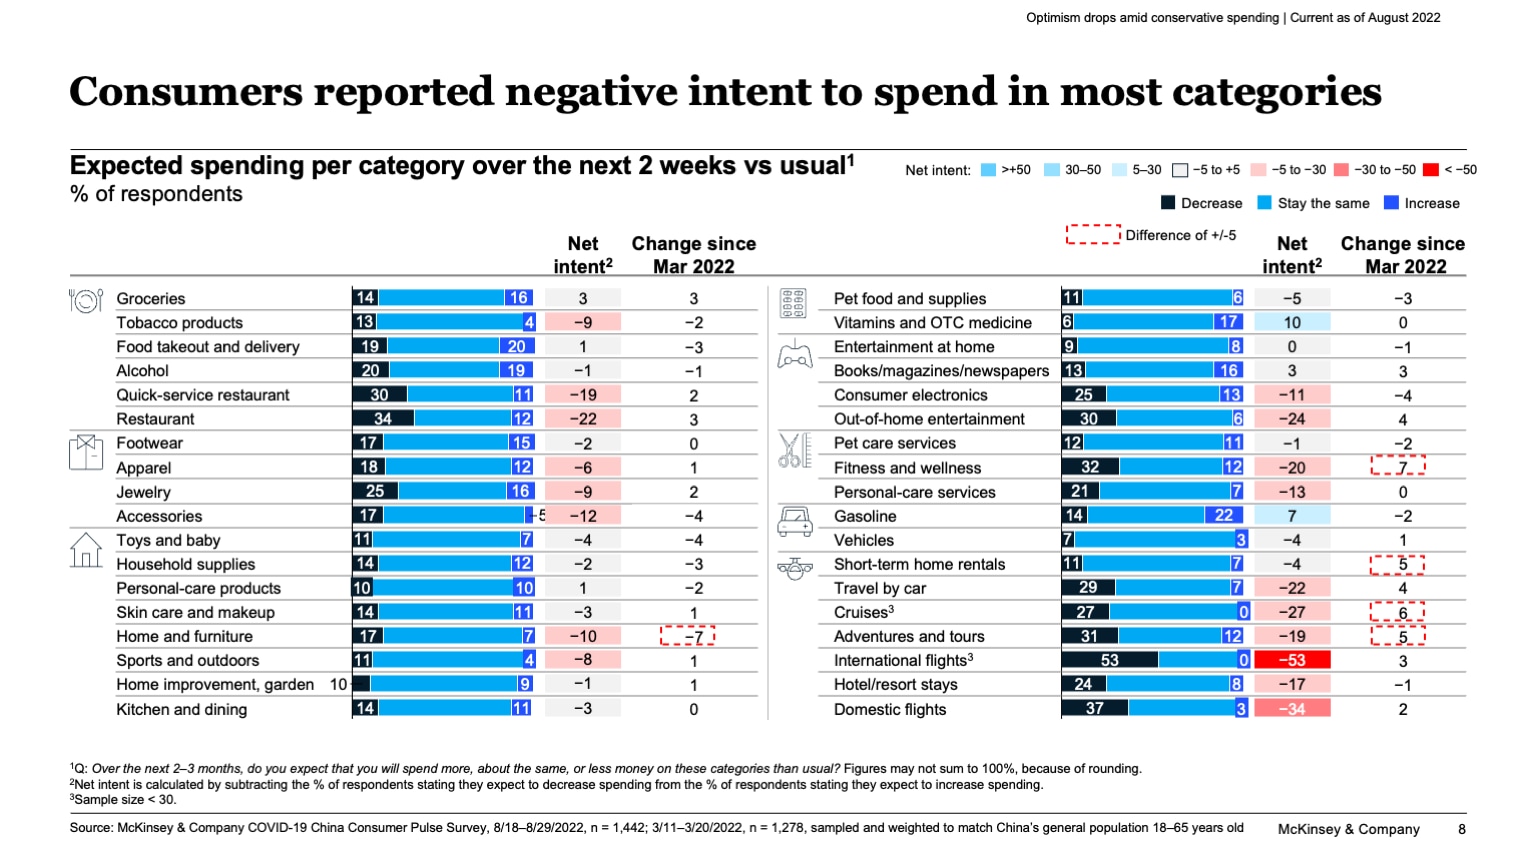 Consumers reported negative intent to spend in most categories